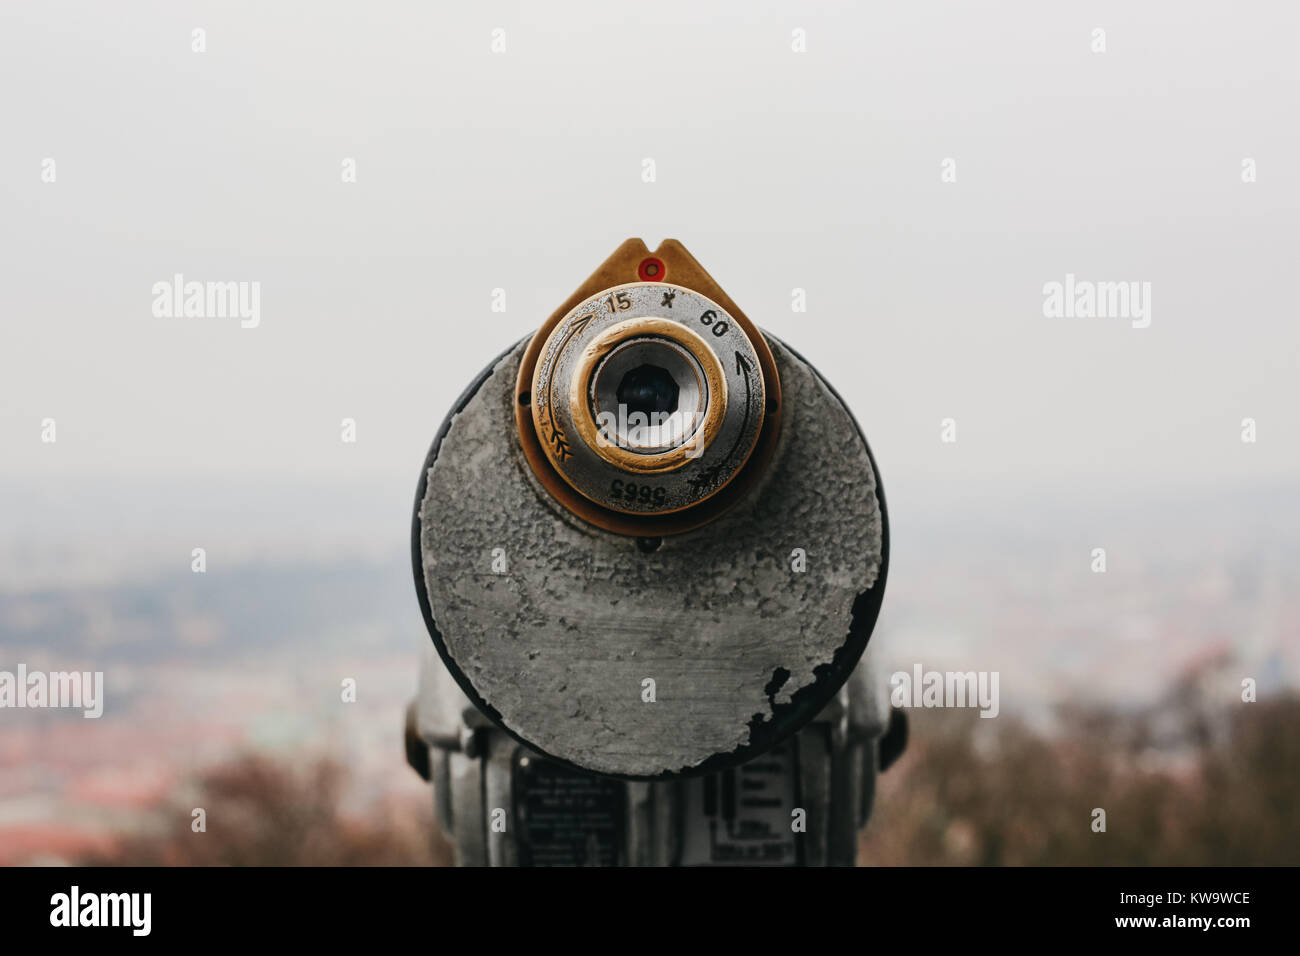 Coin operated binoculars on the viewing platform, Prague, Czech Republic with the blurred city background. Stock Photo